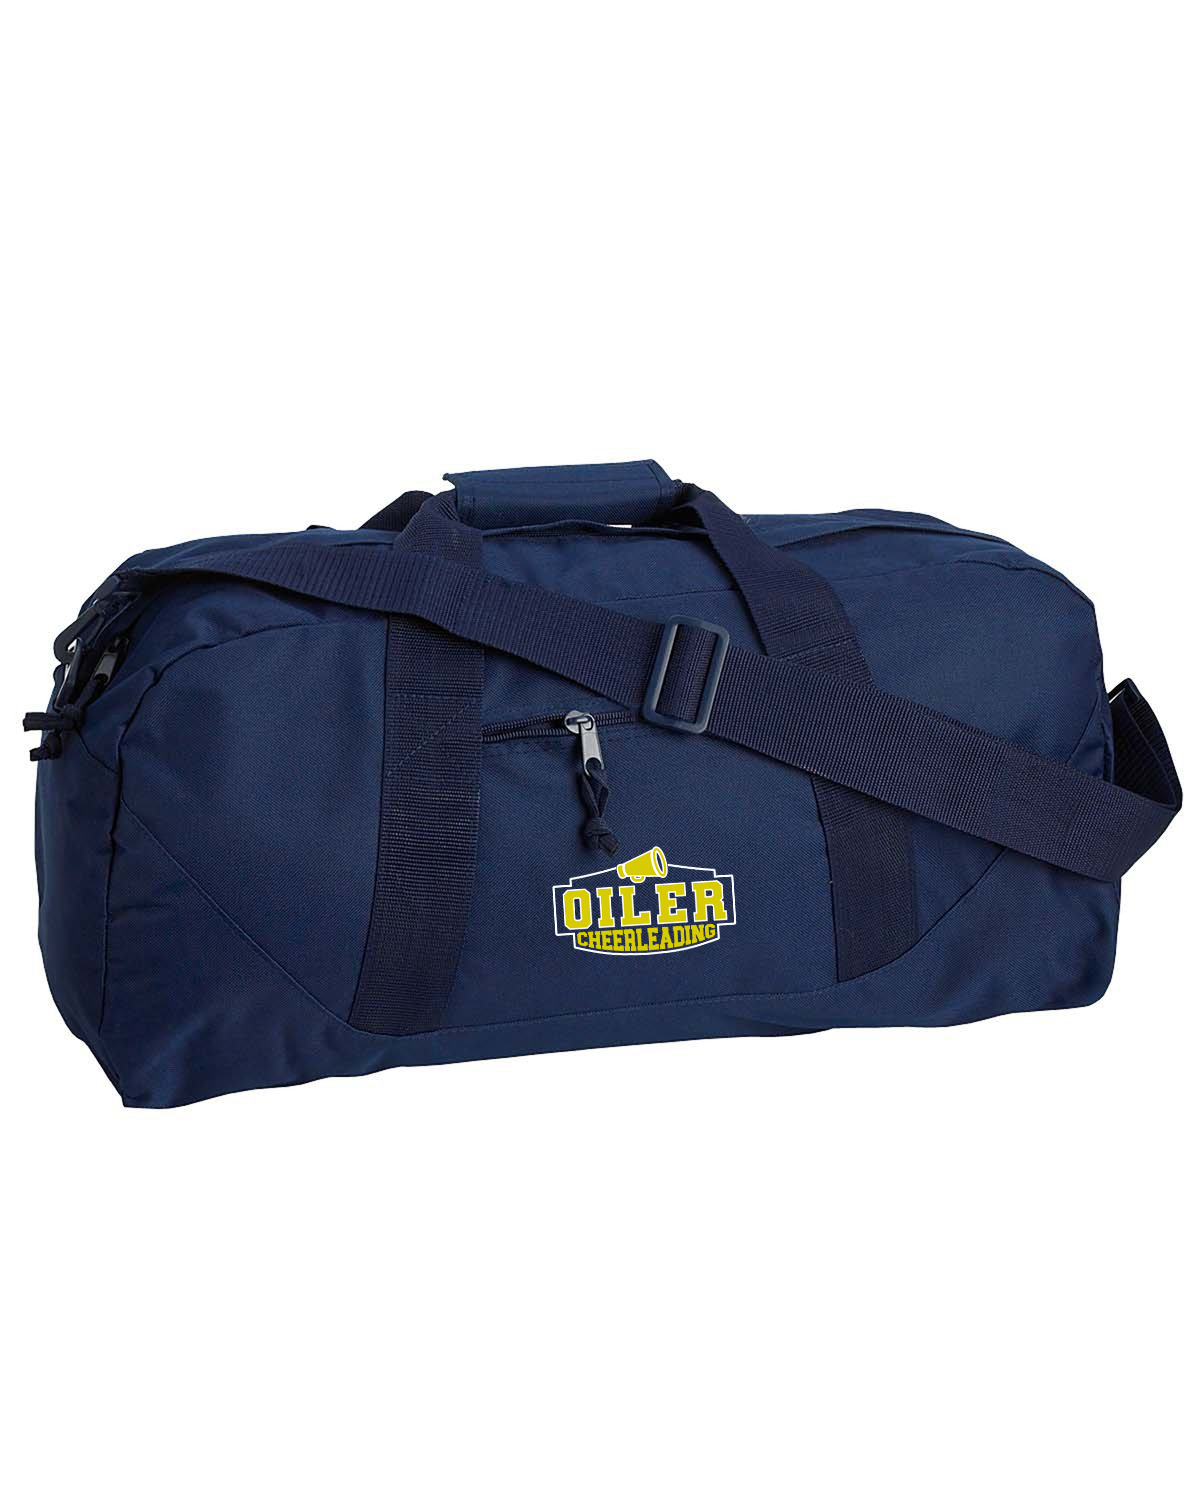 MPHS Cheer Duffel Bag (Personalized)